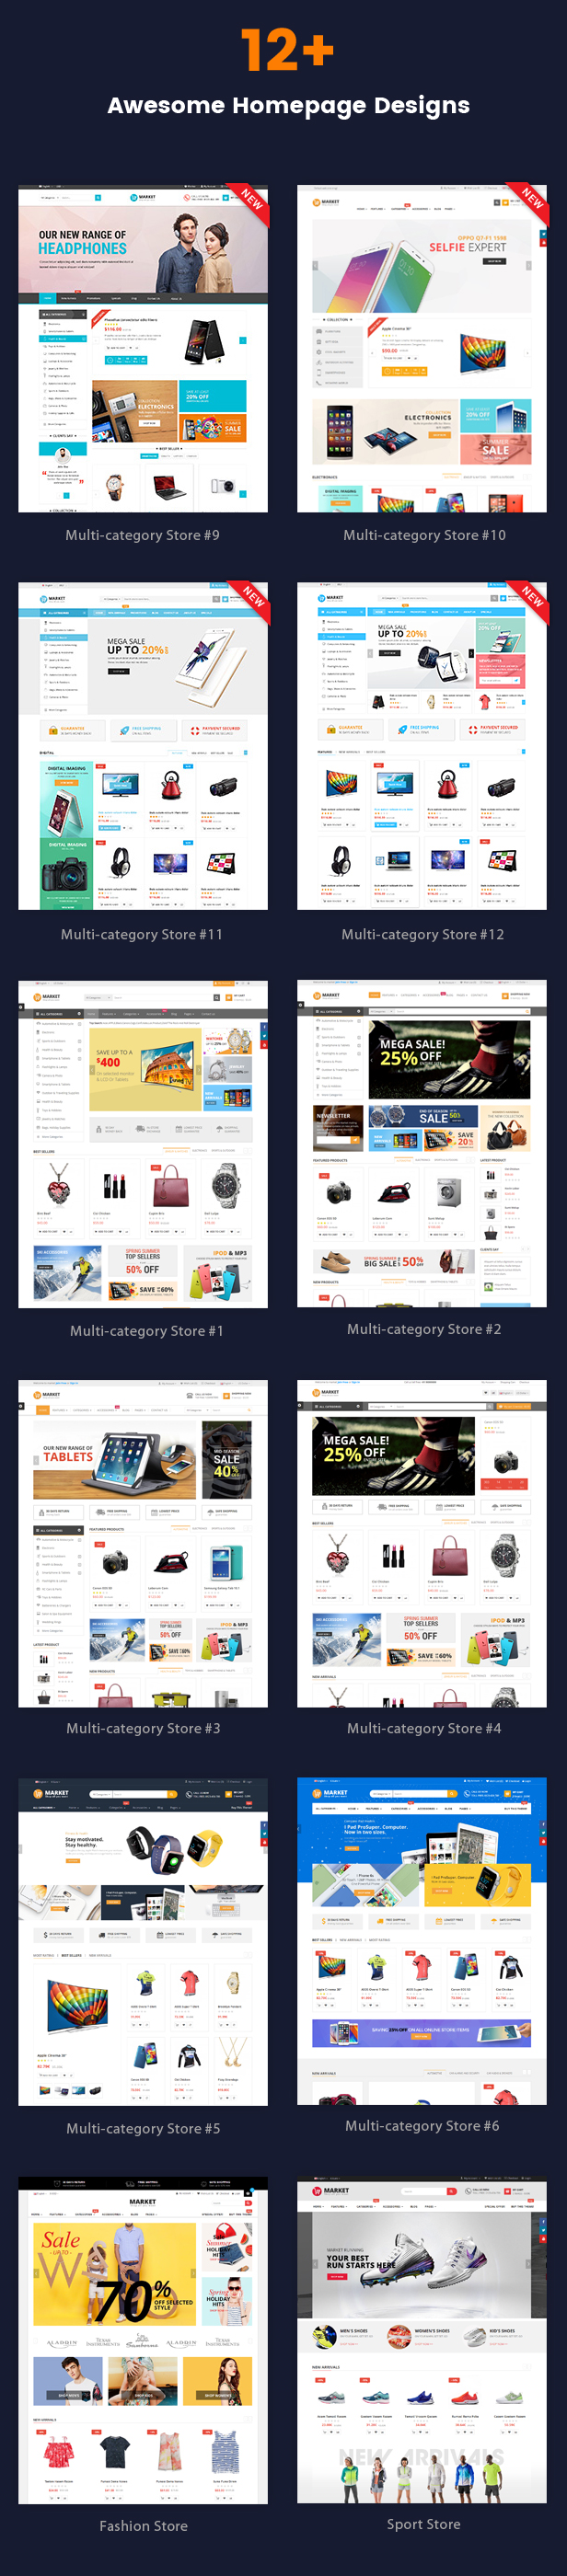 Market - Premium Responsive OpenCart Theme with Mobile-Specific Layout (12 HomePages) - 7